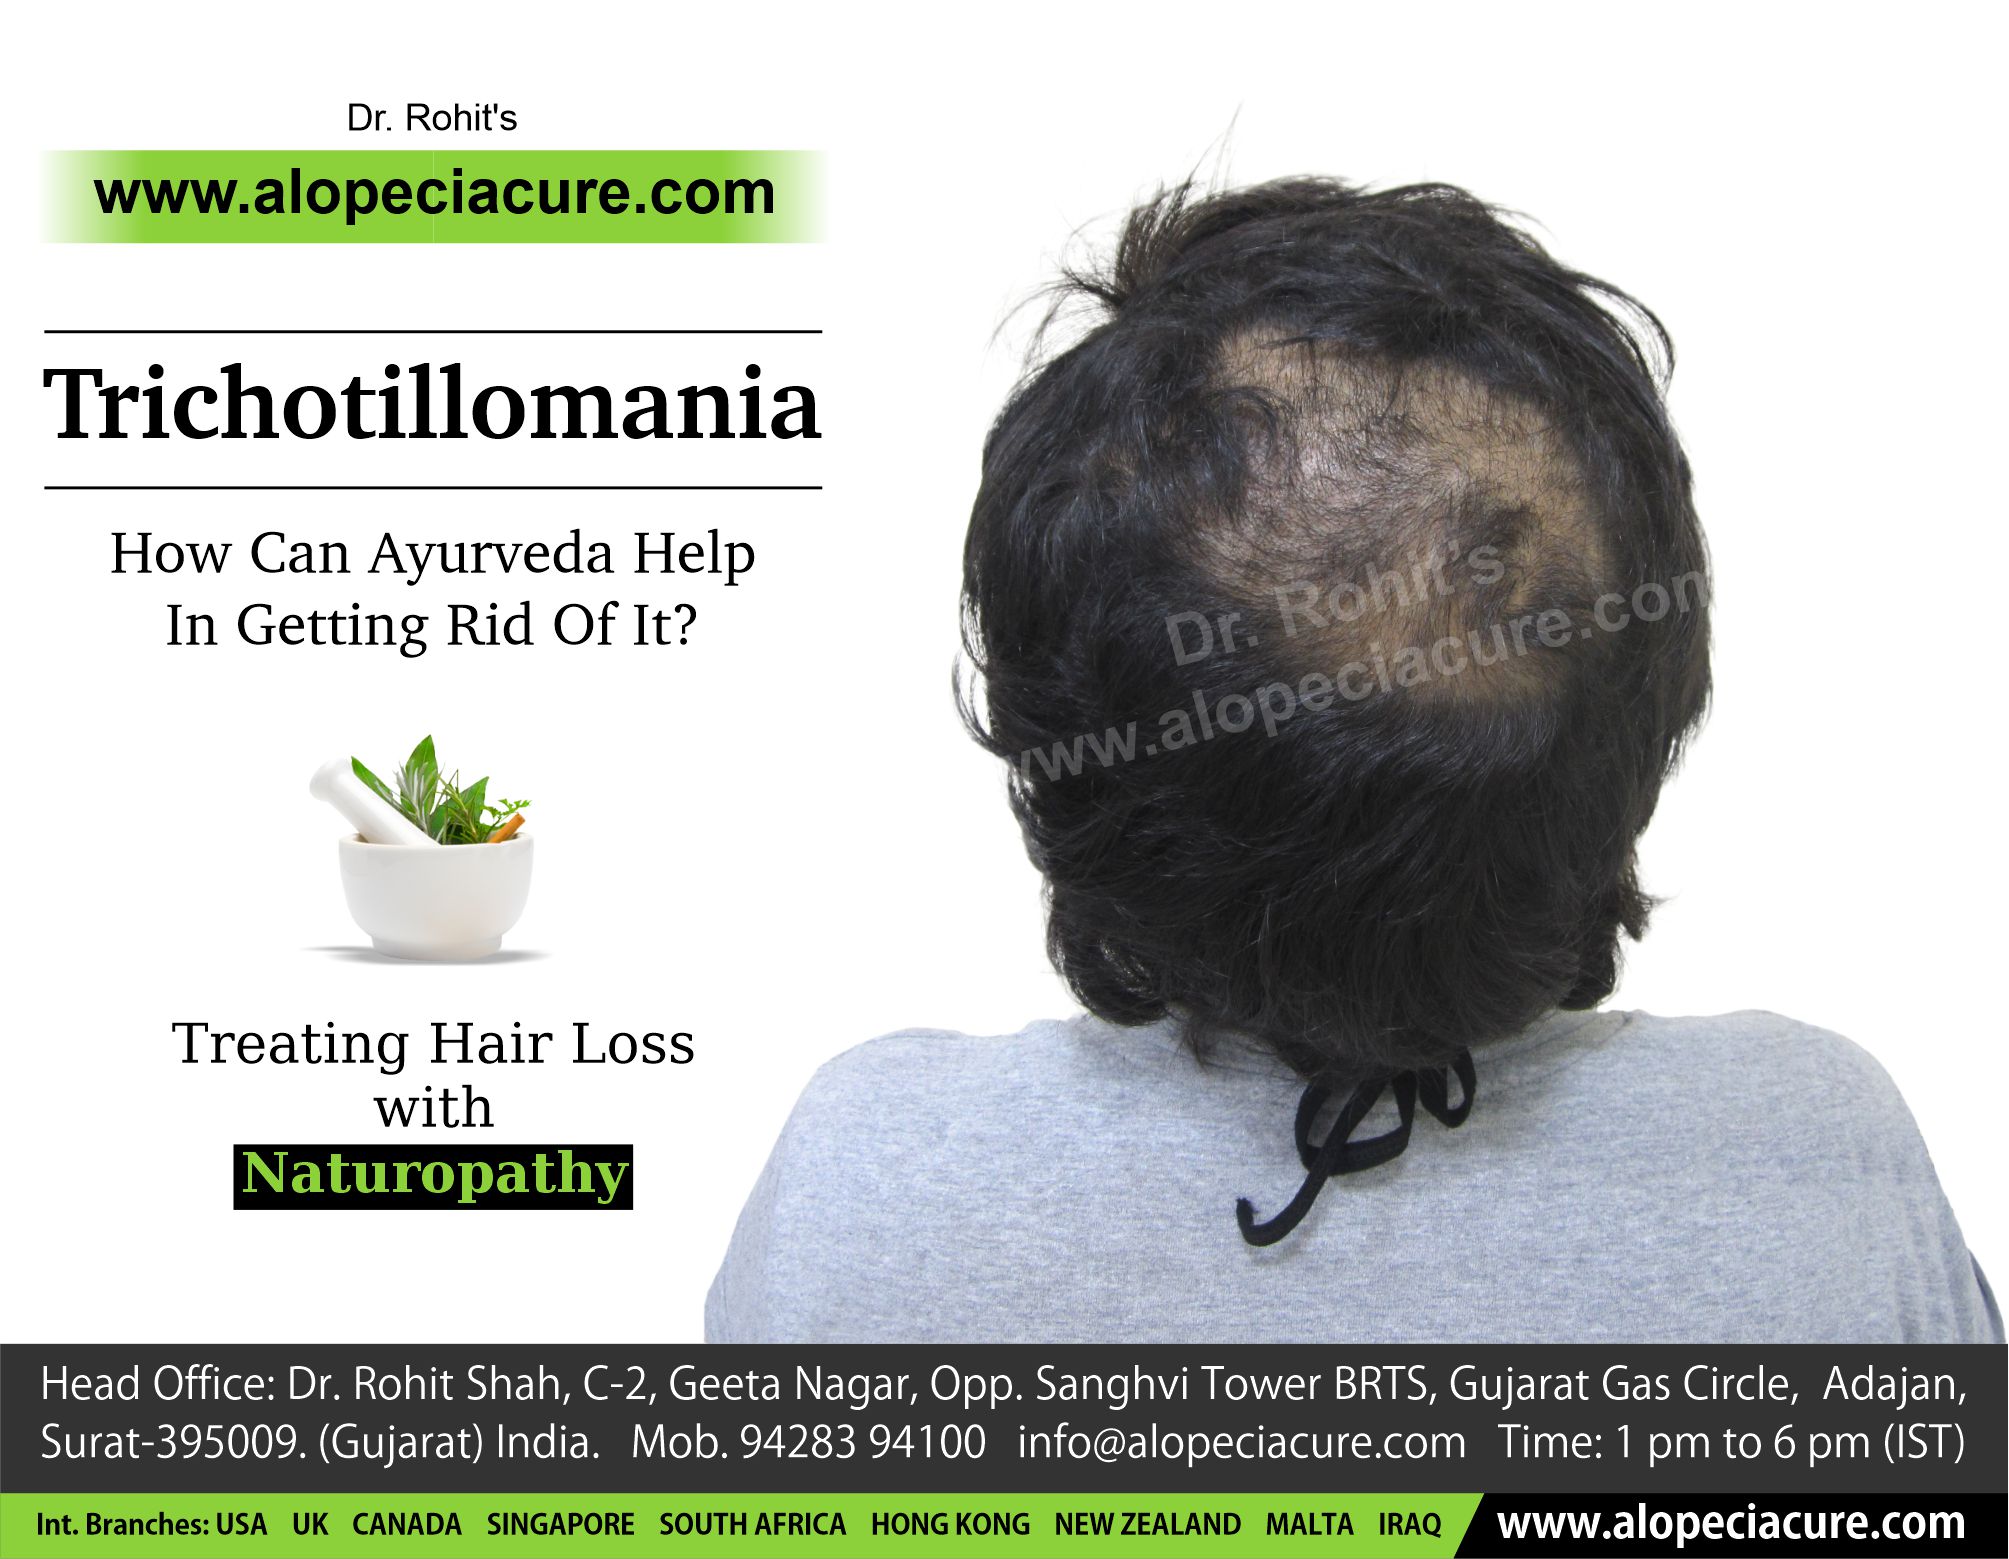 Trichotillomania - How Can Ayurveda Help In Getting Rid Of It?